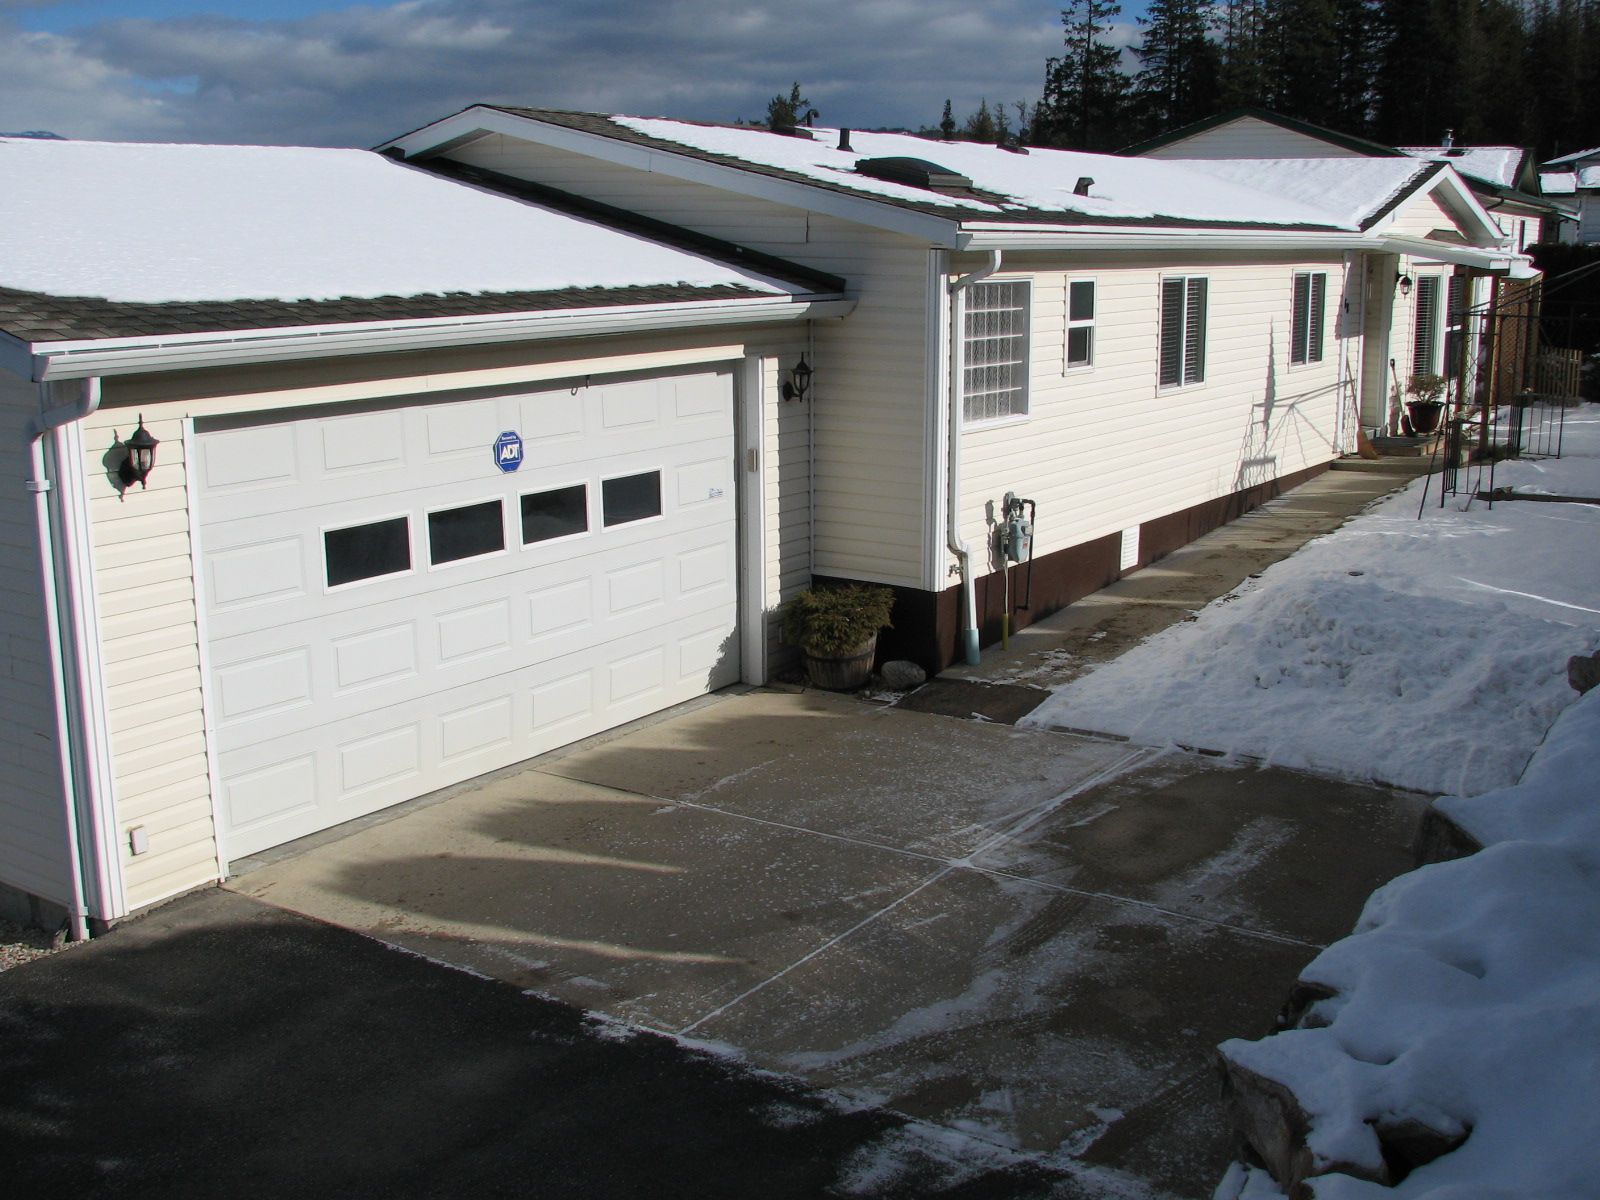 Main Photo: 68 1510 Tans Can Hwy: Sorrento Manufactured Home for sale (Shuswap)  : MLS®# 10225678